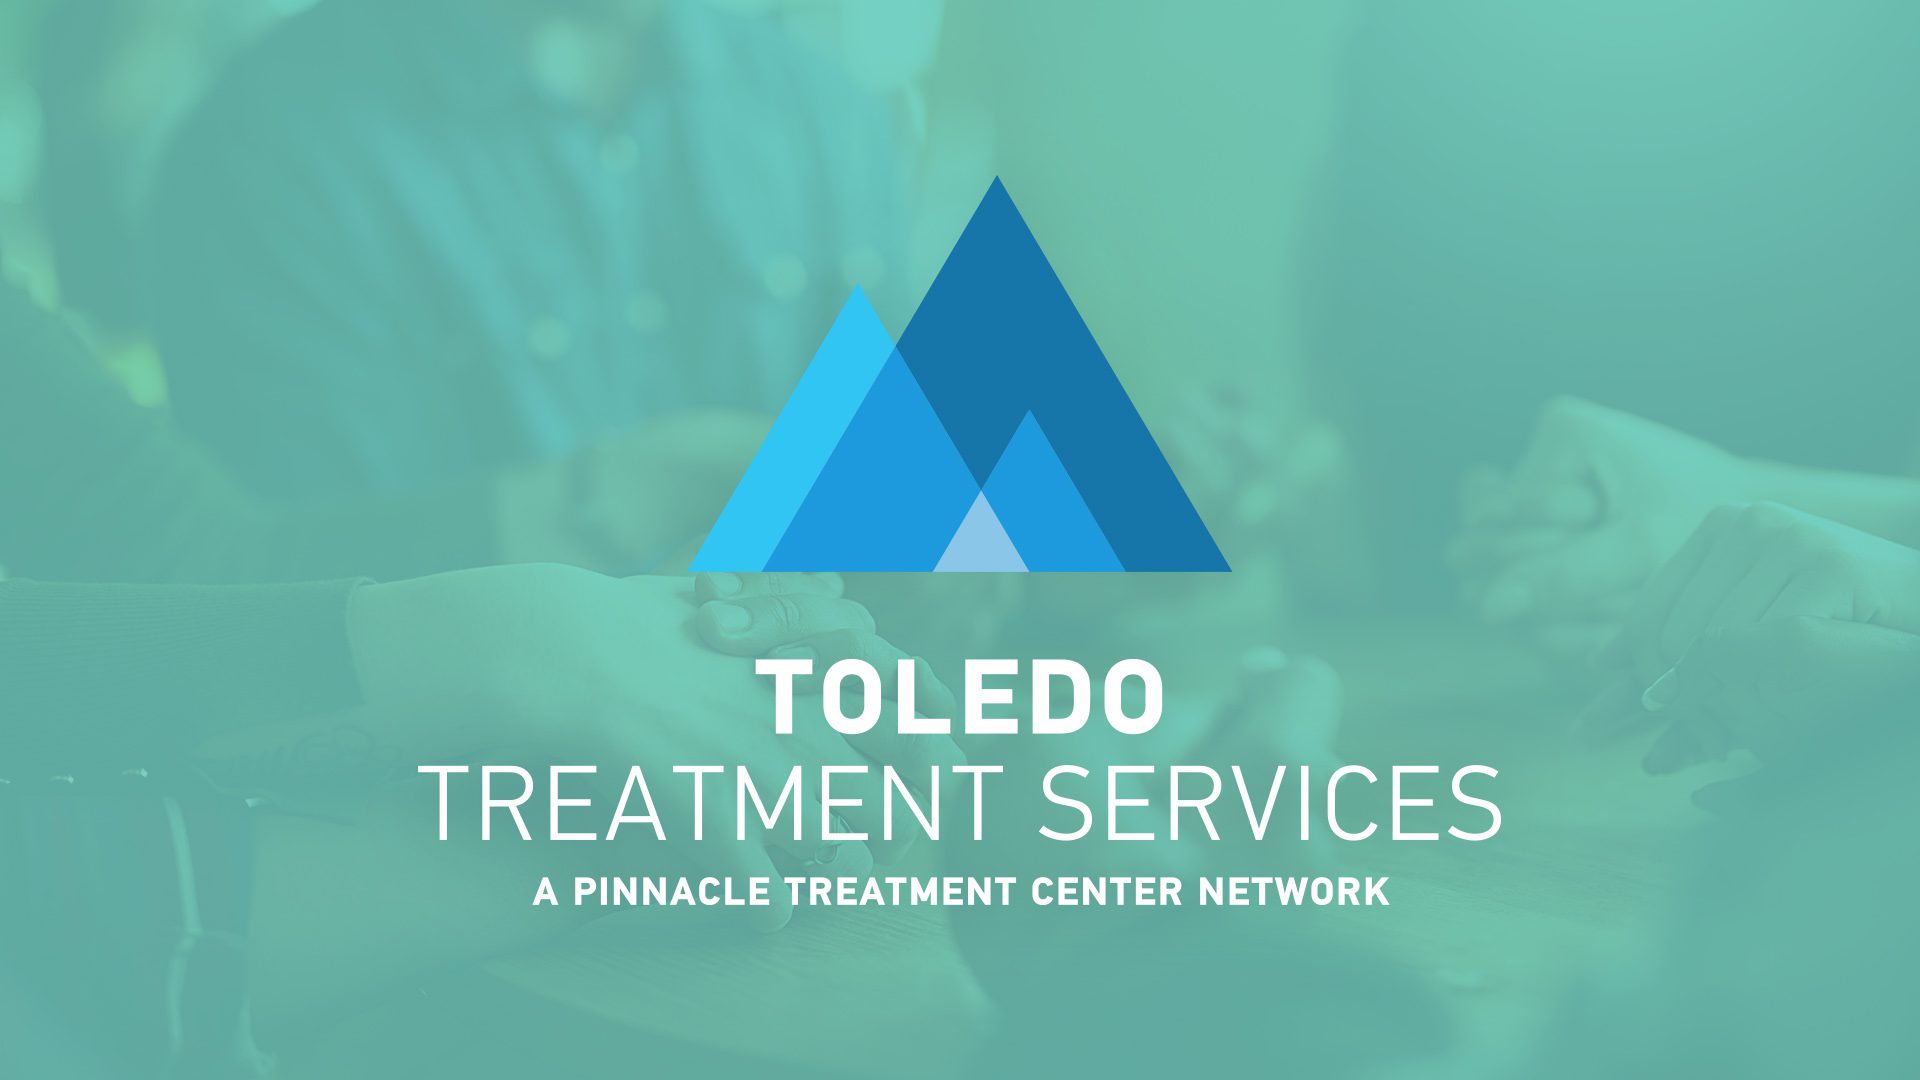 Pinnacle Treatment Centers, Inc. Expands Ohio Substance Abuse Recovery Network with Opening of Toledo Location